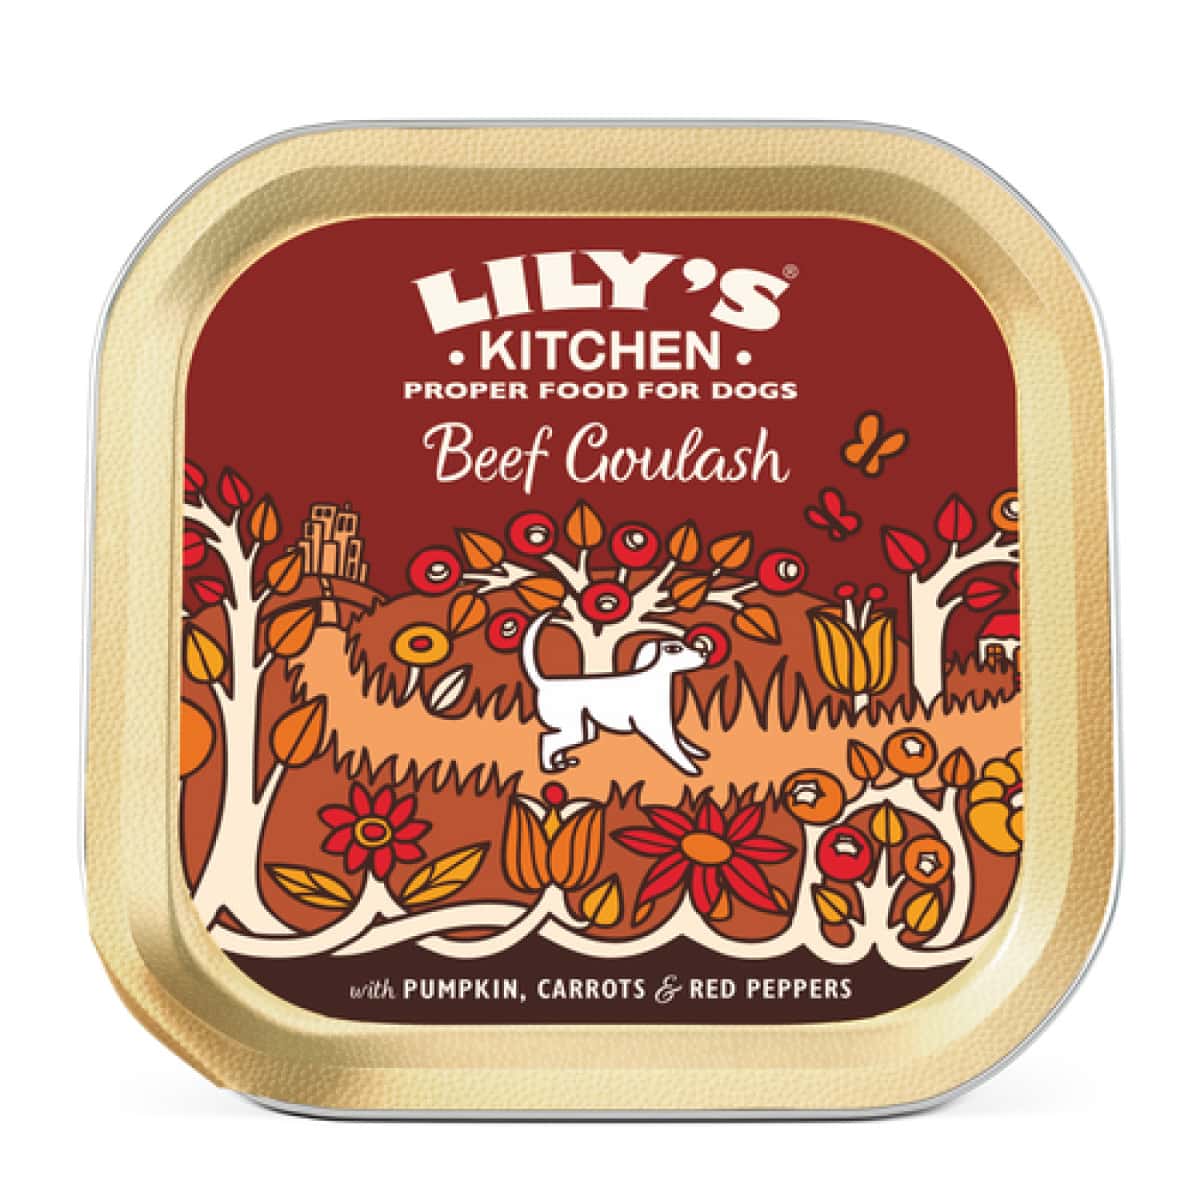 Lily's Kitchen Beef Goulash 150g Main Image